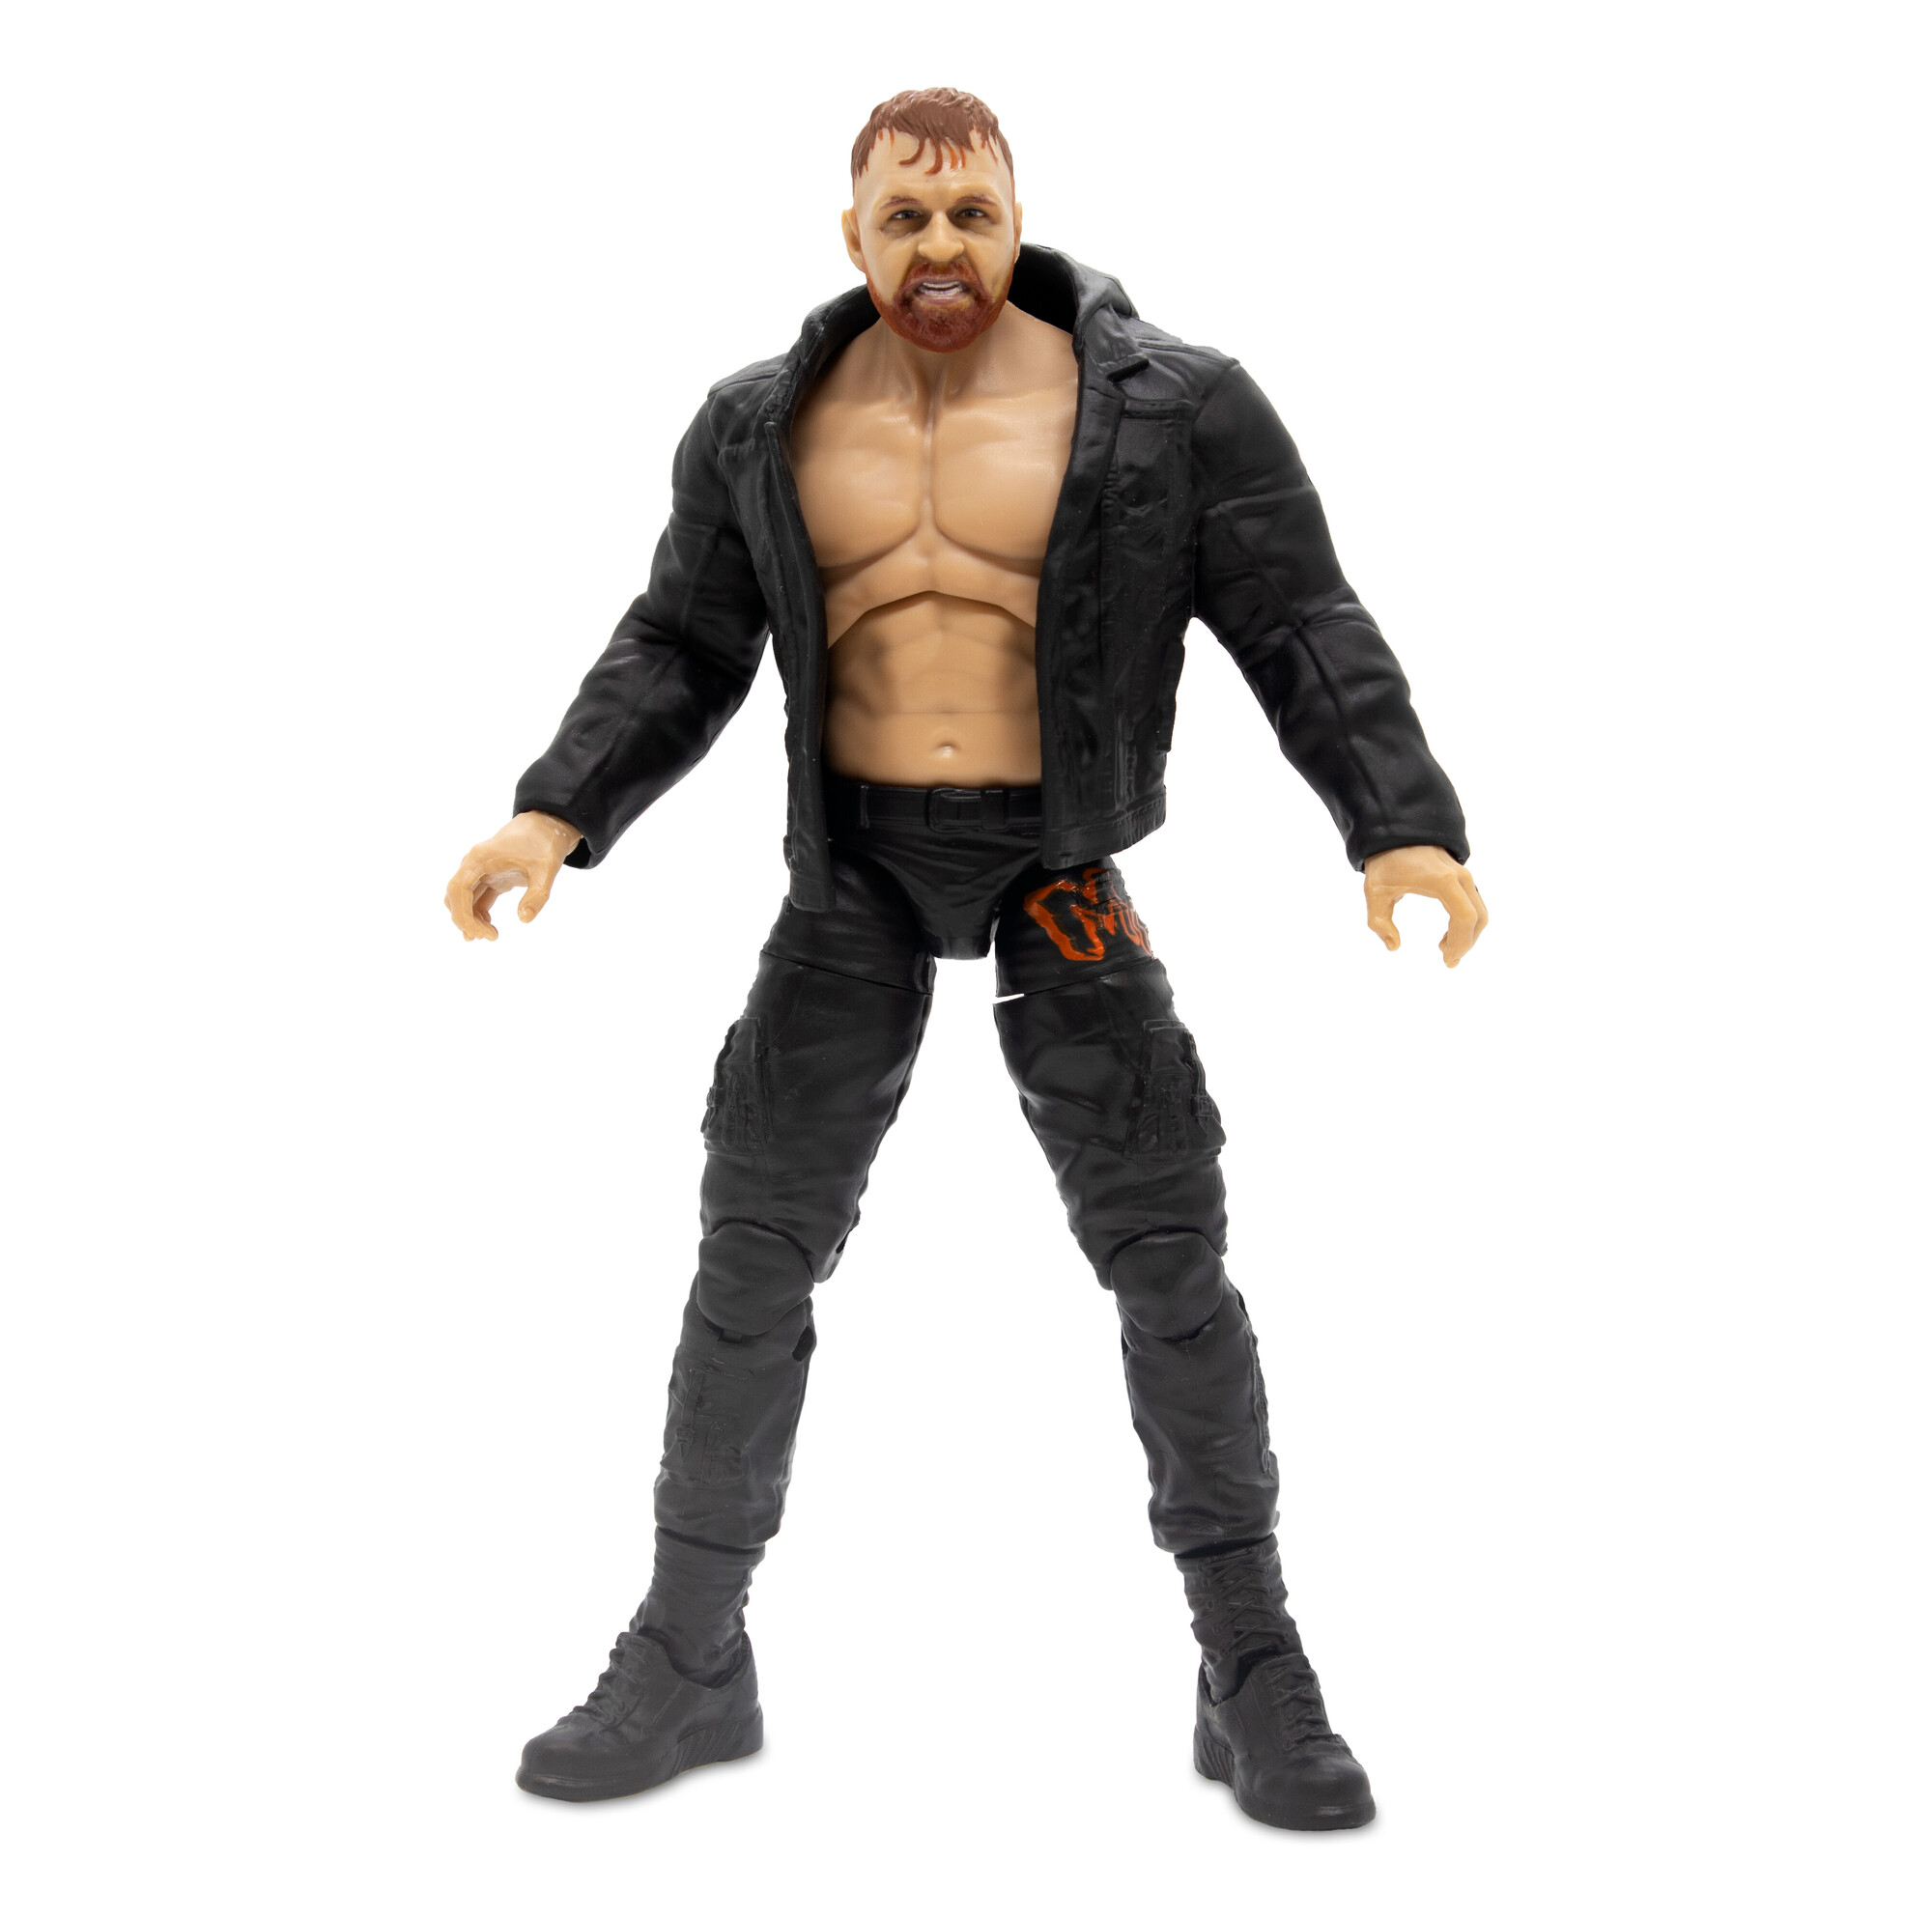 AEW All Elite Wrestling Unrivaled Collection Series 8 Jon Moxley Action Figure - image 2 of 5